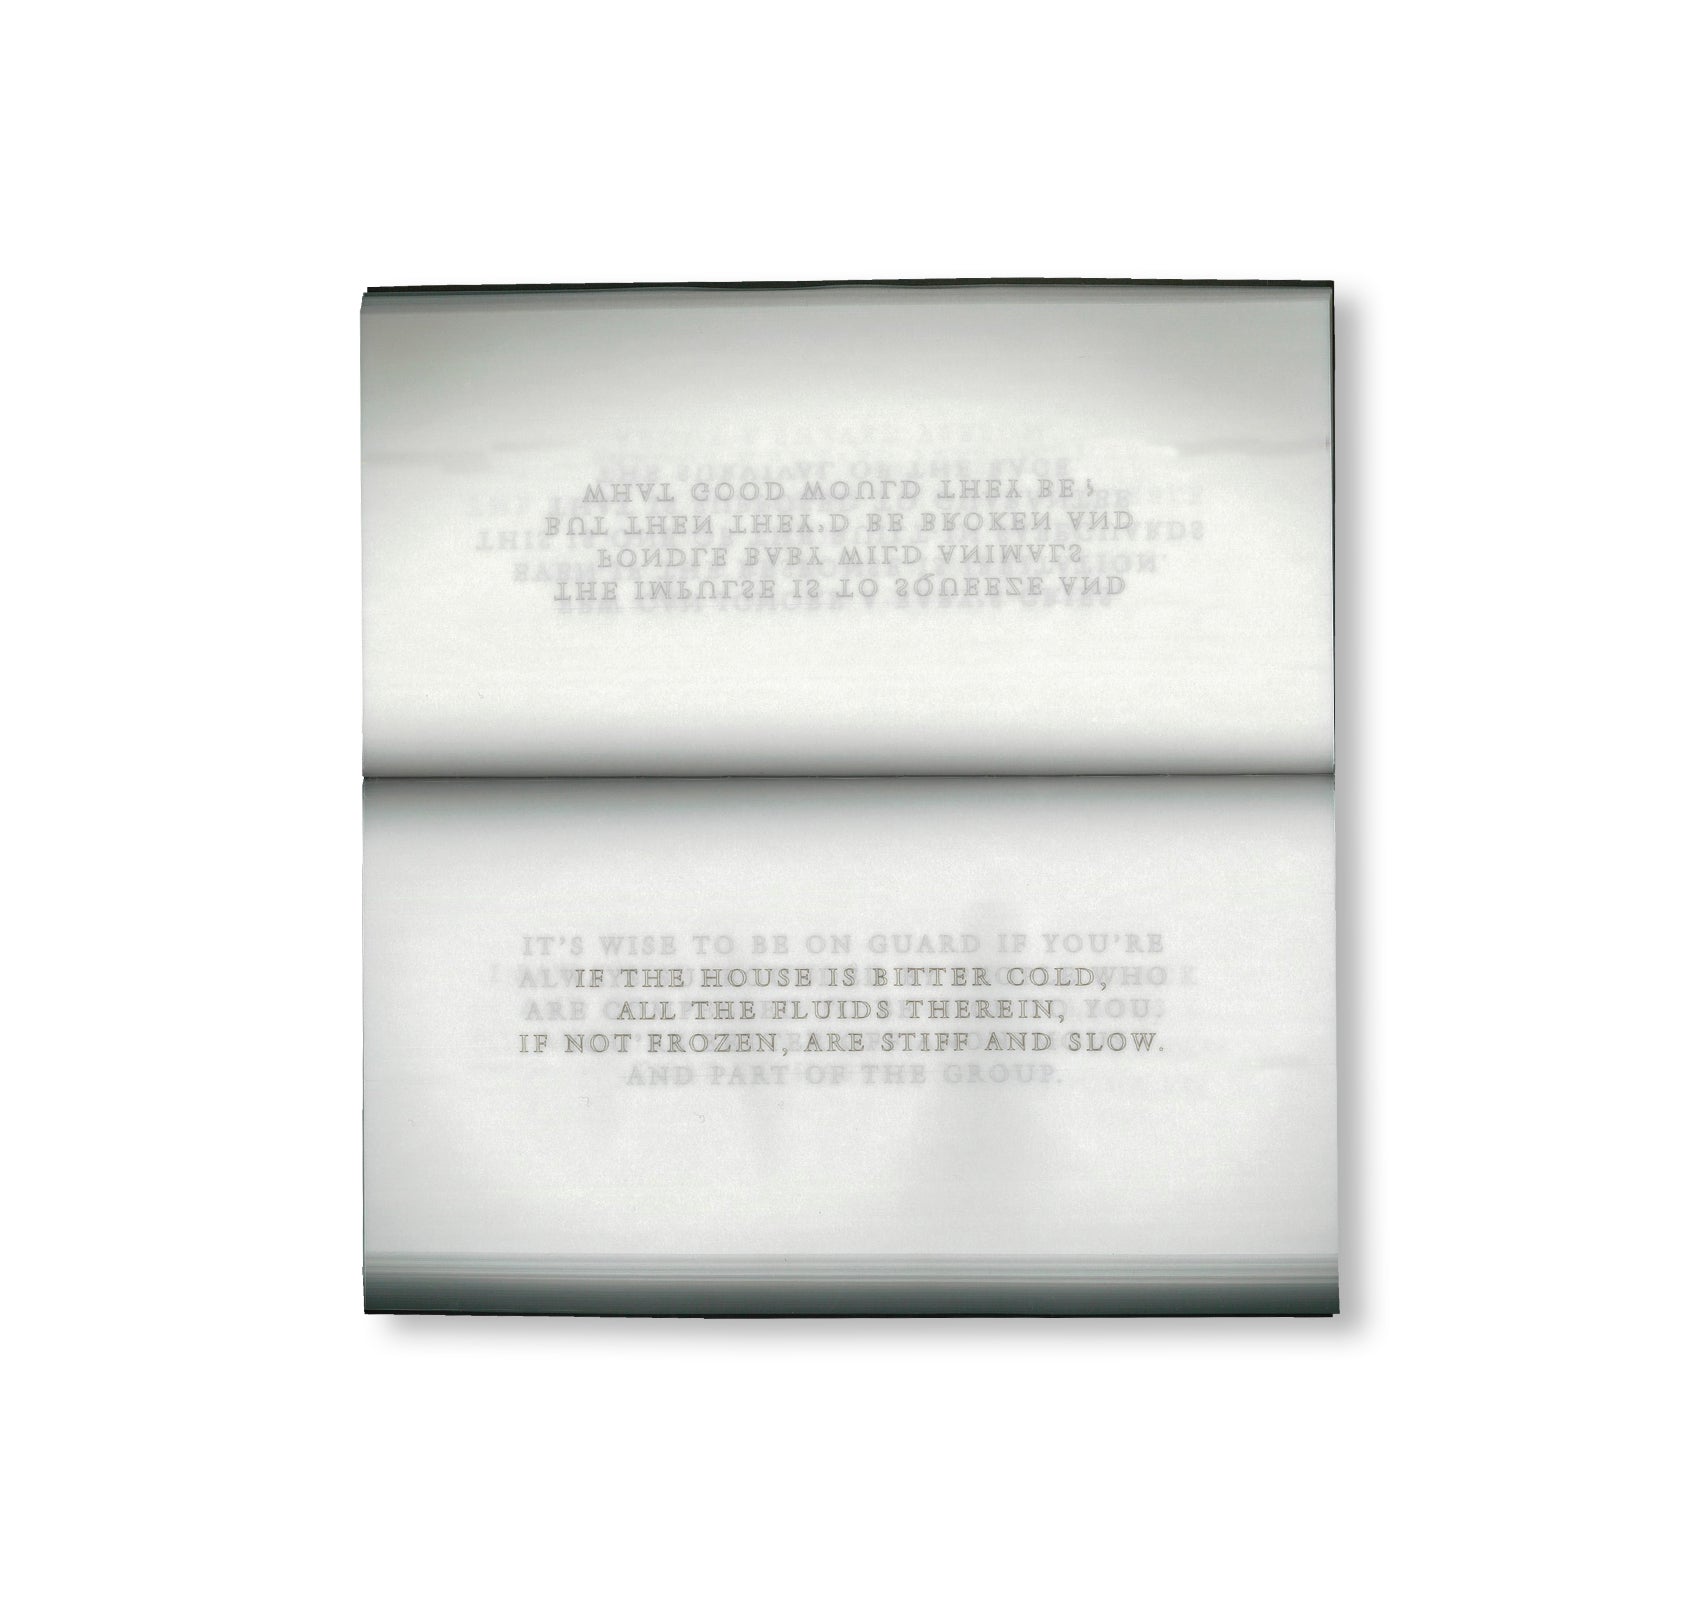 LIVING by Jenny Holzer [SECOND PRINTING]